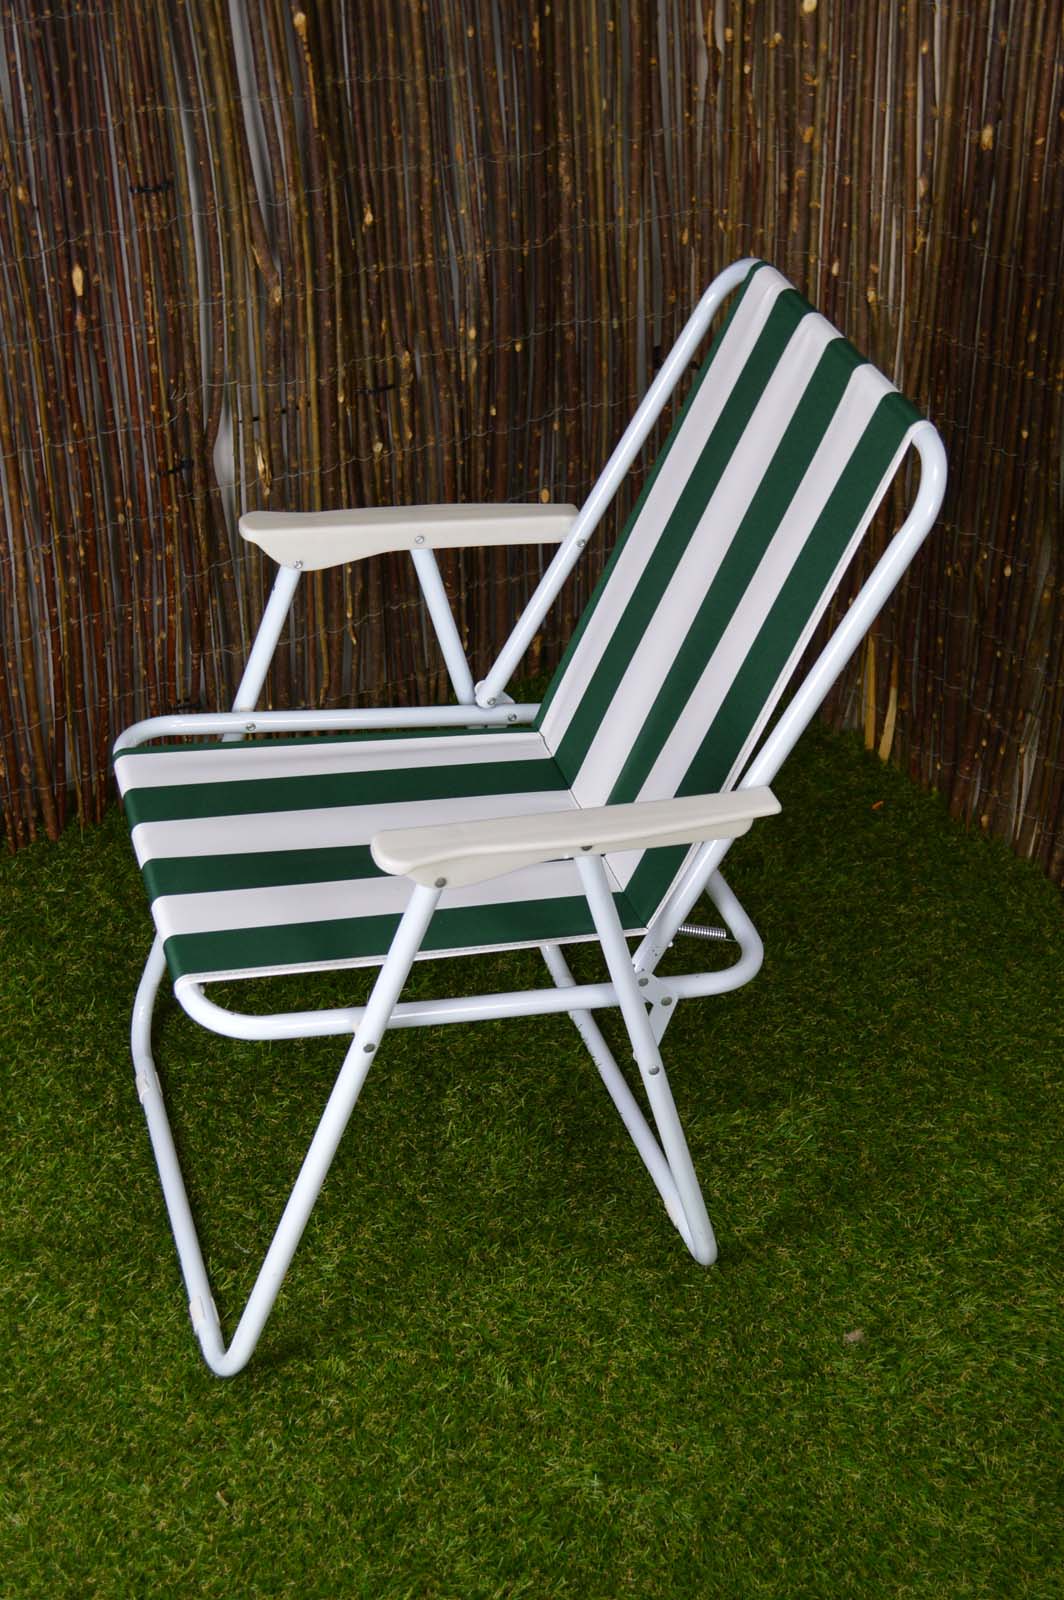 6 Pack of Folding Camping / Picnic Chair in Green and White Garden Patio